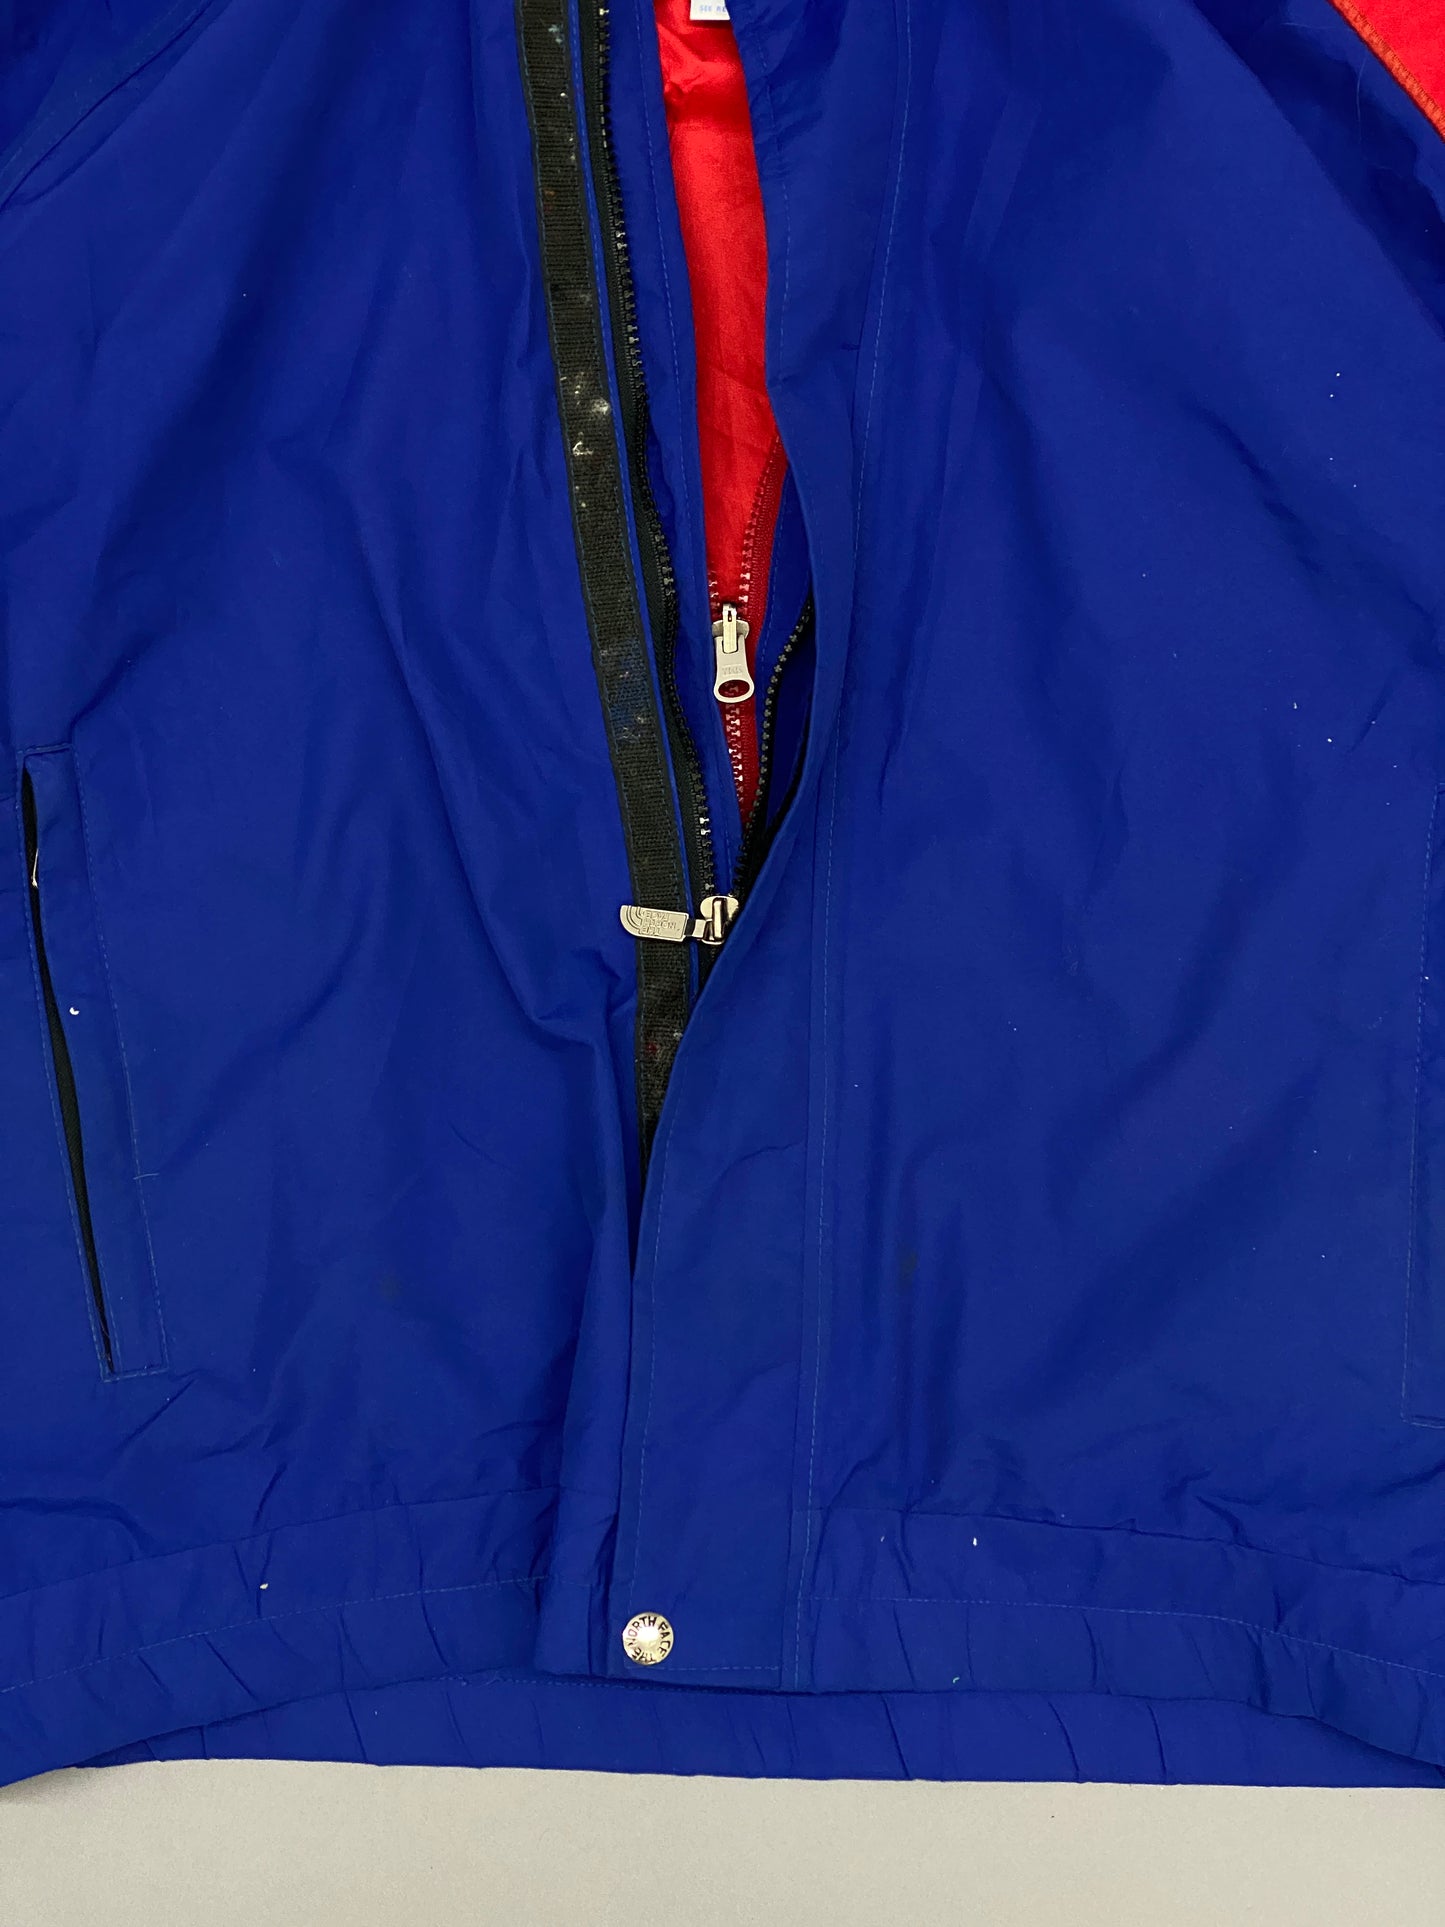 The North Face Gore-Tex Extreme Vintage Jacket